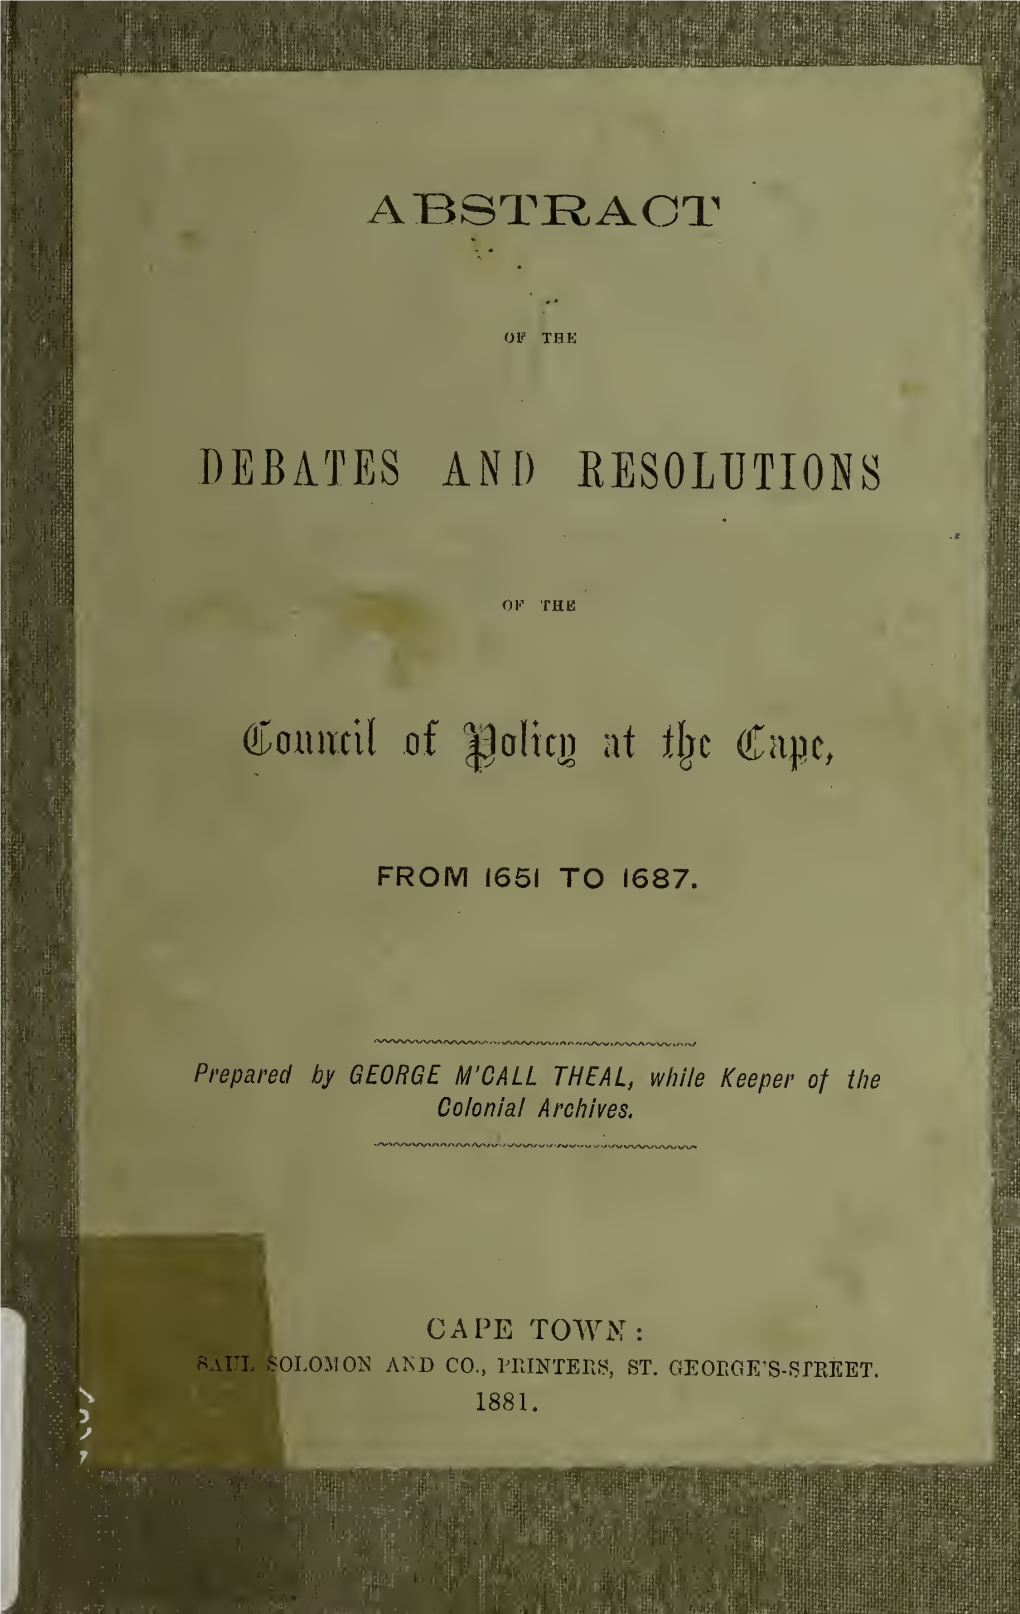 Abstract of the Debates and Resolutions of the Council of Policy